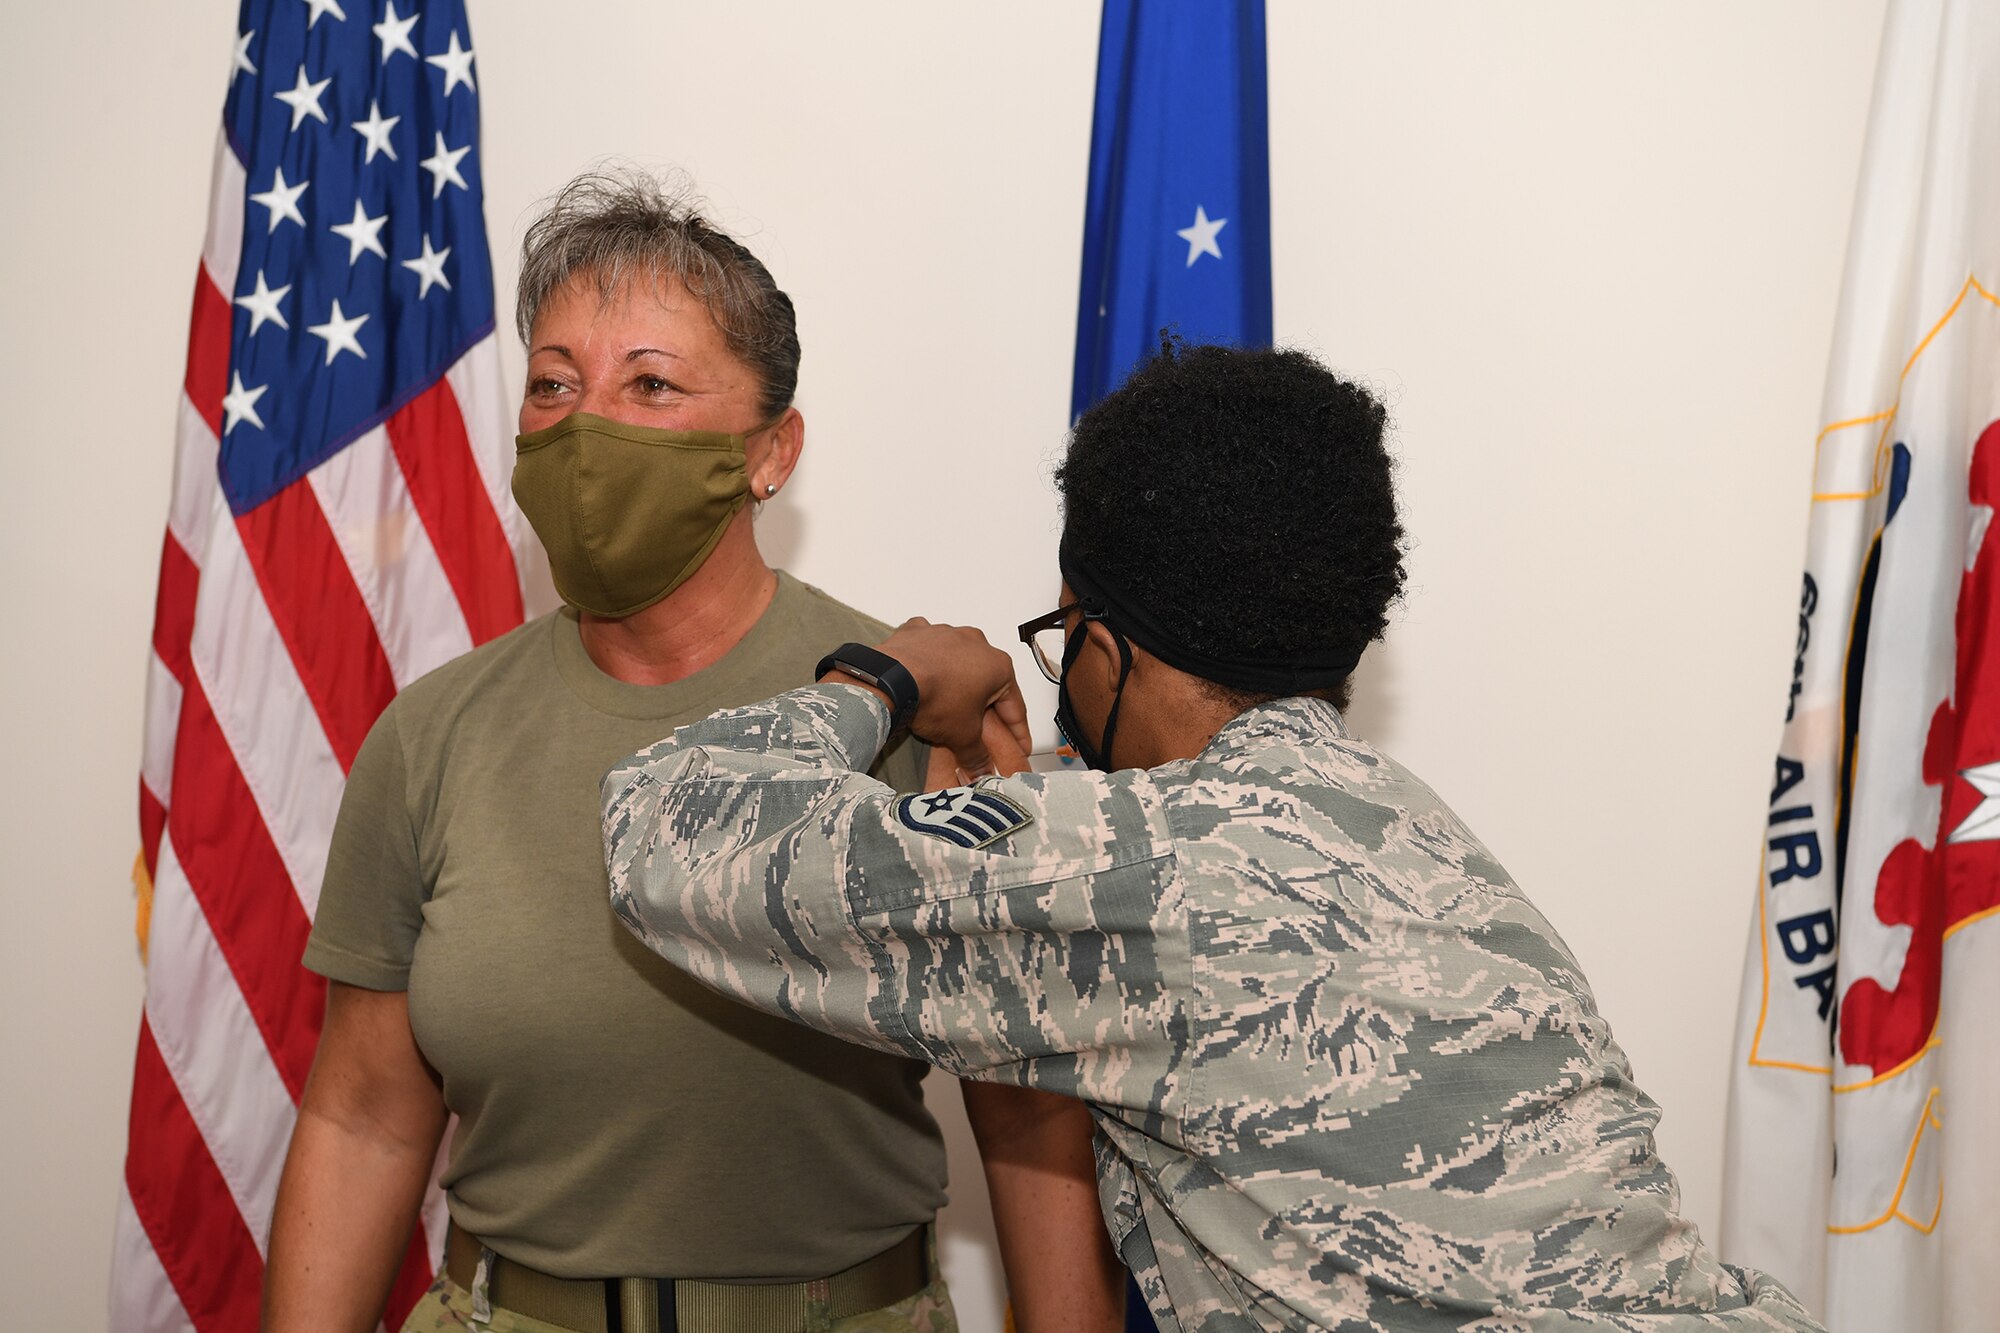 Col. Katrina Stephens, installation commander, receives the influenza vaccine from a 66th Medical Squadron personnel at Hanscom Air Force Base, Mass, late 2020. Officials from the 66 MDS recommend personnel receive a flu shot as soon as possible to protect themselves against illness during the COVID-19 pandemic. (U.S. Air Force photo by Mark Herlihy)